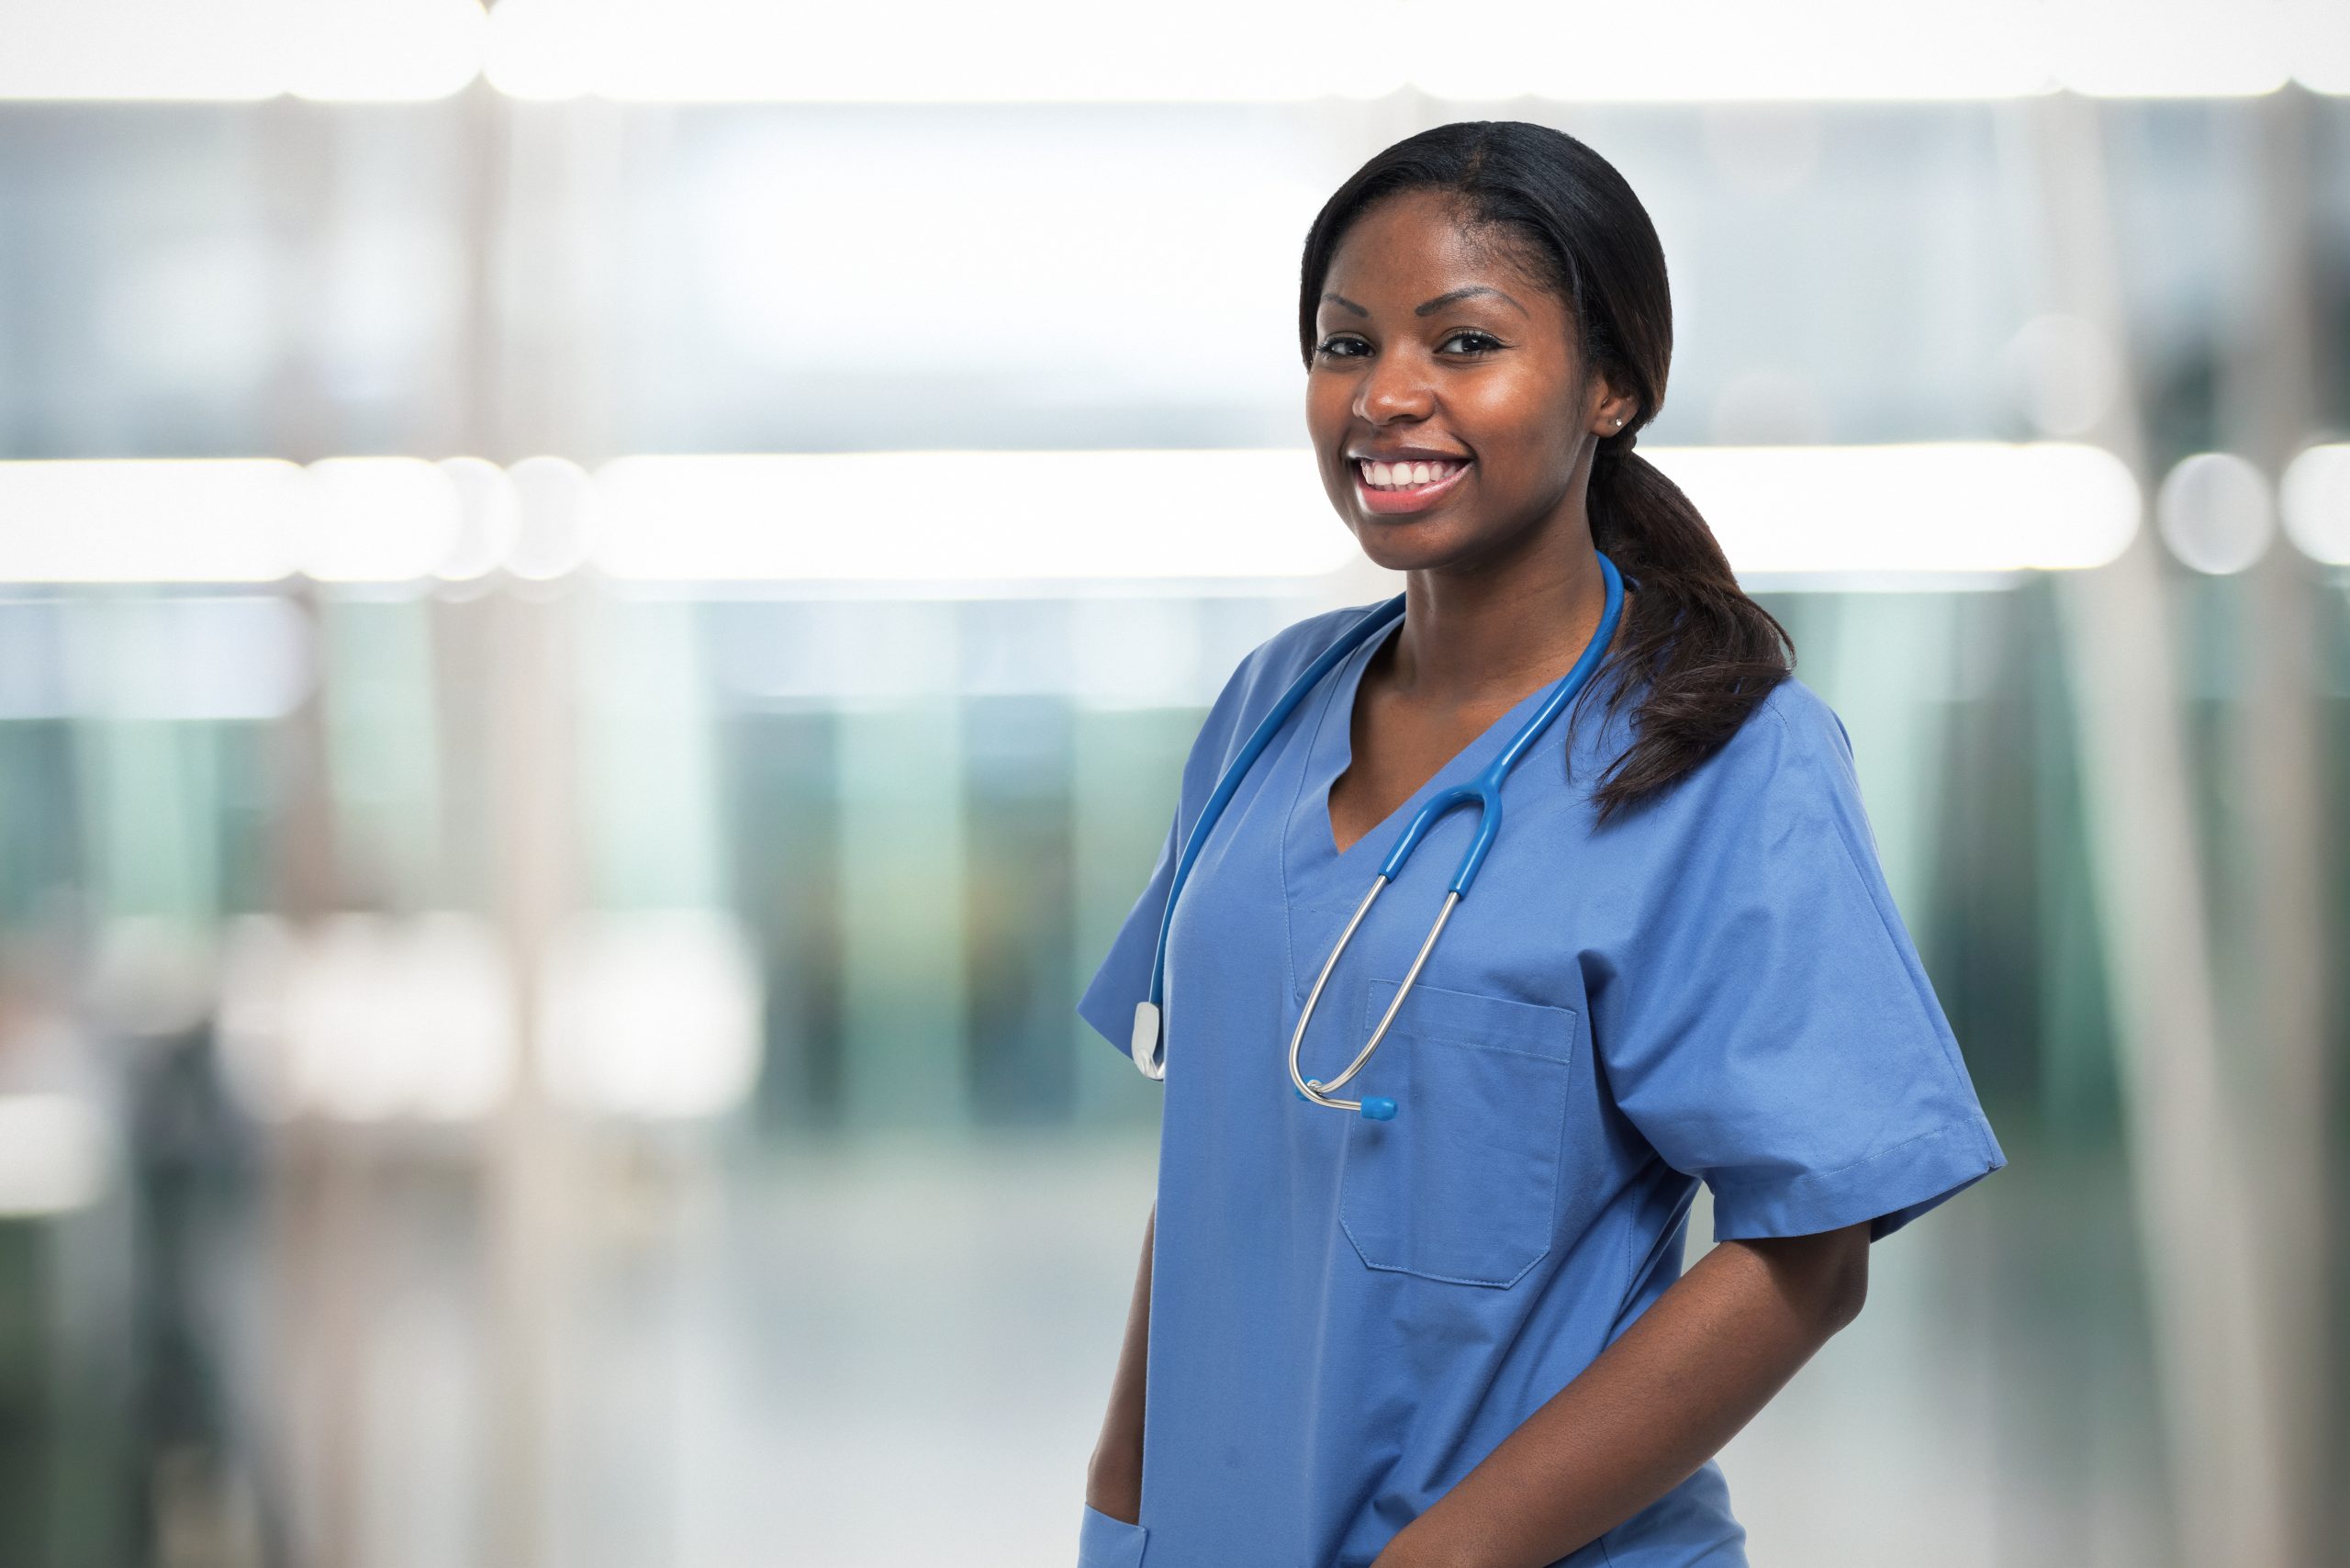 Image of a nurse for our ranking of 30 Most Affordable Online Bachelor’s in Nursing Degrees from Private Colleges